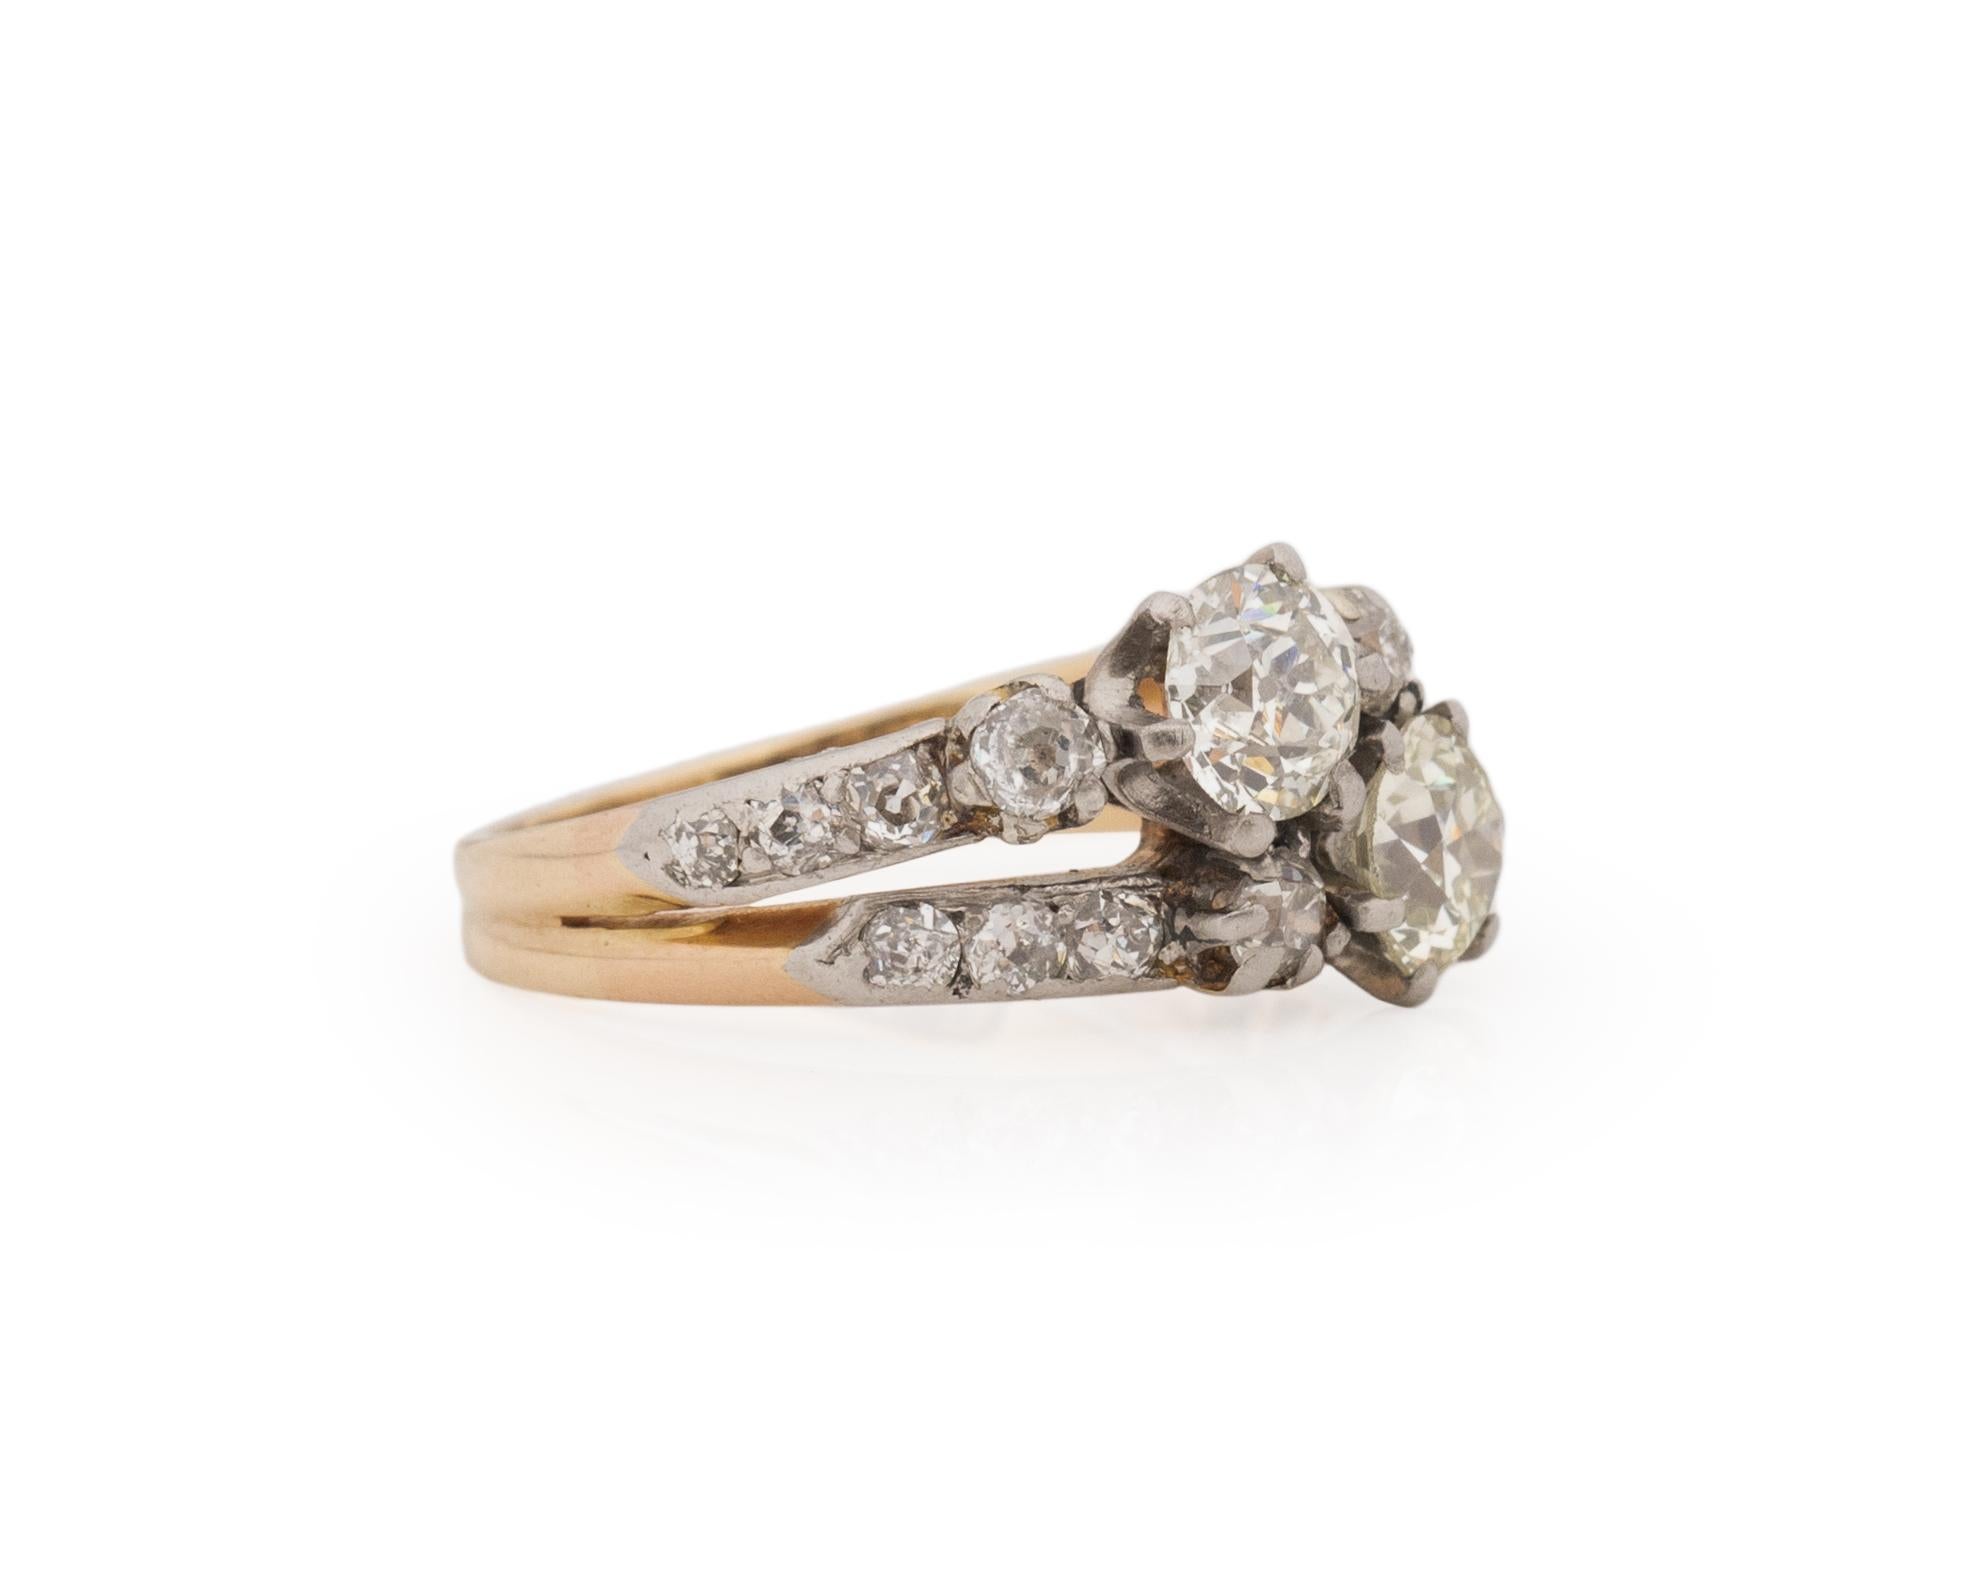 Ring Size: 5
Metal Type: 14K Yellow Gold and Platinum [Hallmarked, and Tested]
Weight: 4.0 grams
2 Main Diamond Details:
Weight: 1.06ct, total weight (2 Diamonds)
Cut: Old European brilliant
Color: K/L
Clarity: VS/SI
Side Diamond Details: 
.50ct,